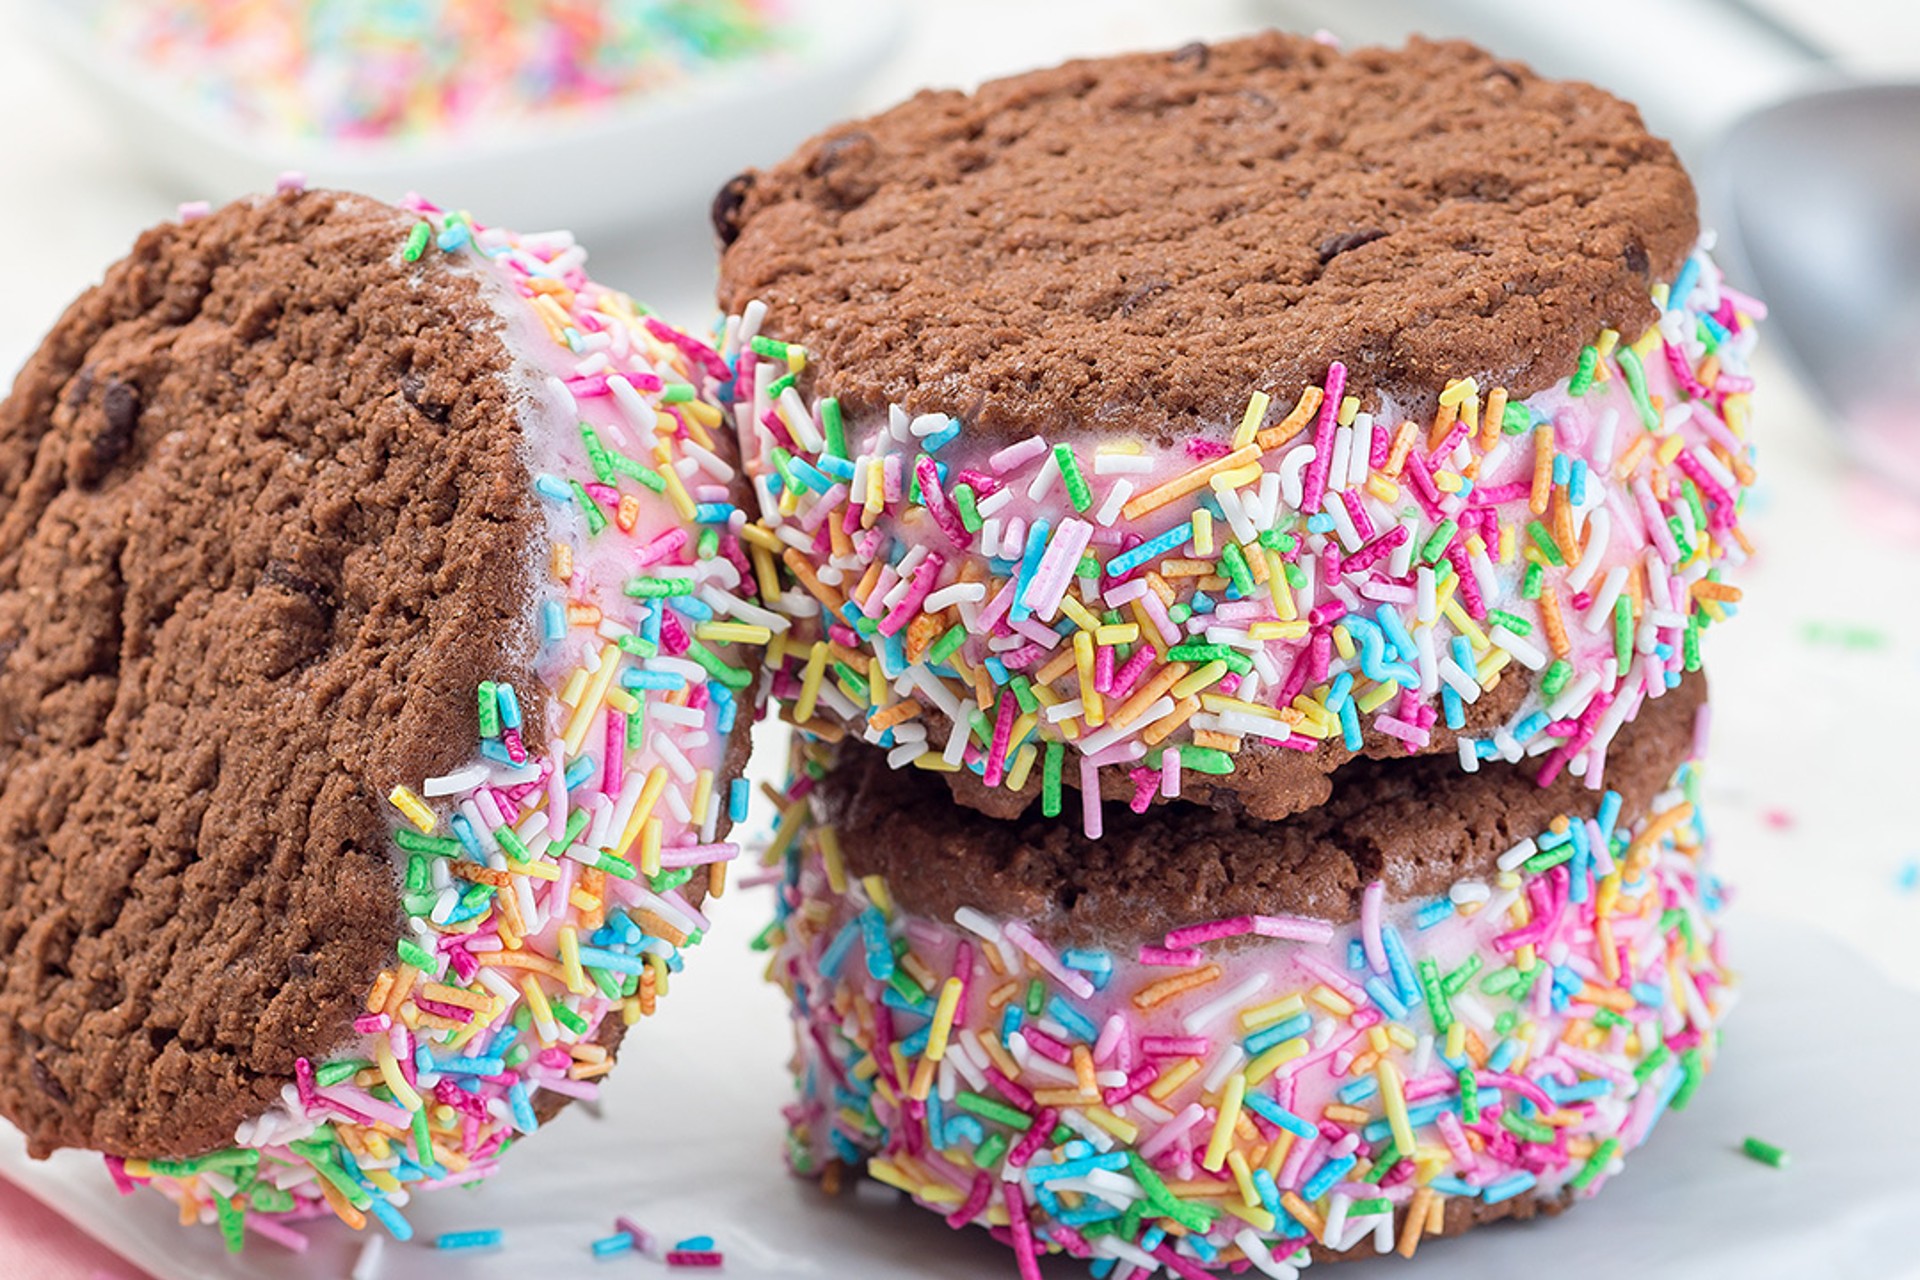 chocolate strawberry ice cream sandwiches with sprinkles